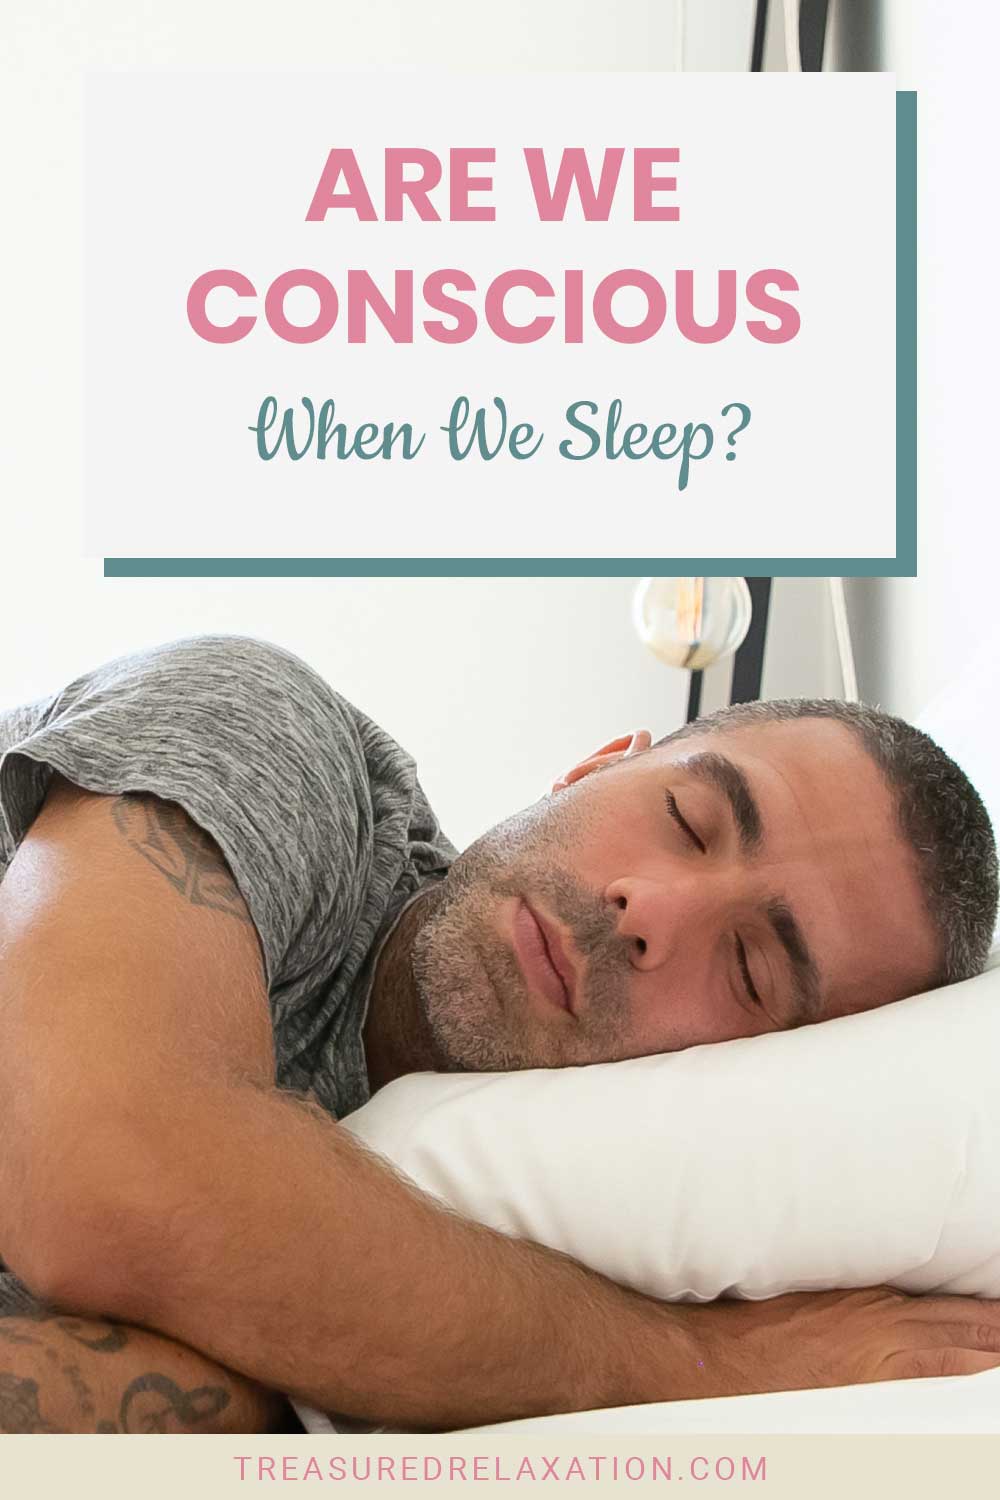 Are We Conscious When We Sleep?